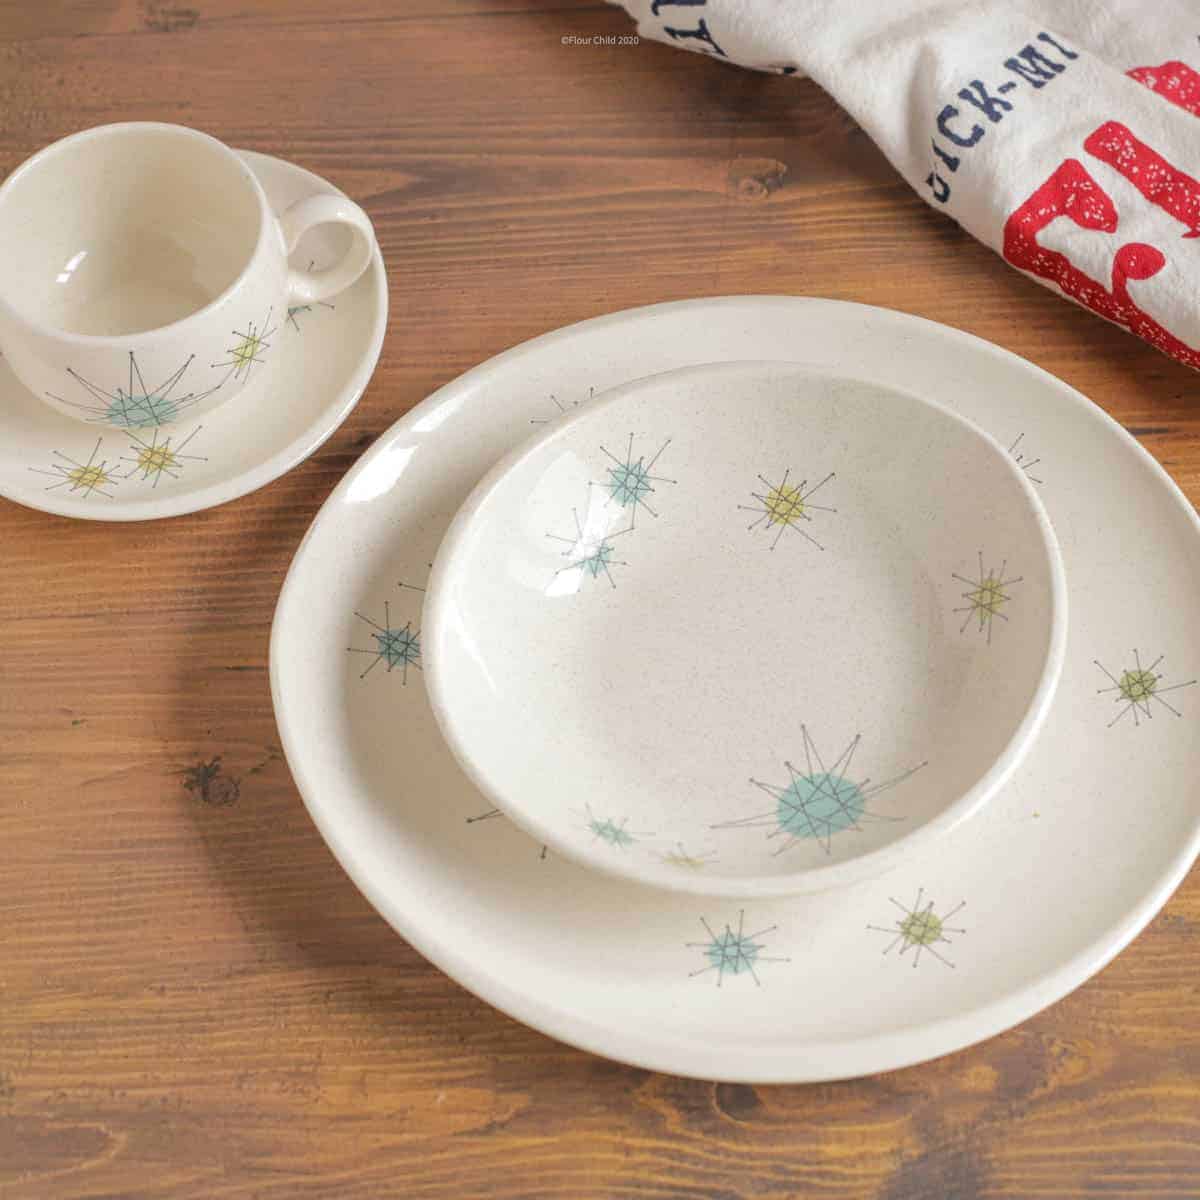 The Franciscan Starburst dinnerware was a spacey and whimsical design on glazed pottery was an instant classic. It was fun and colorful and reflected American's post-war prosperity and exuberance. 